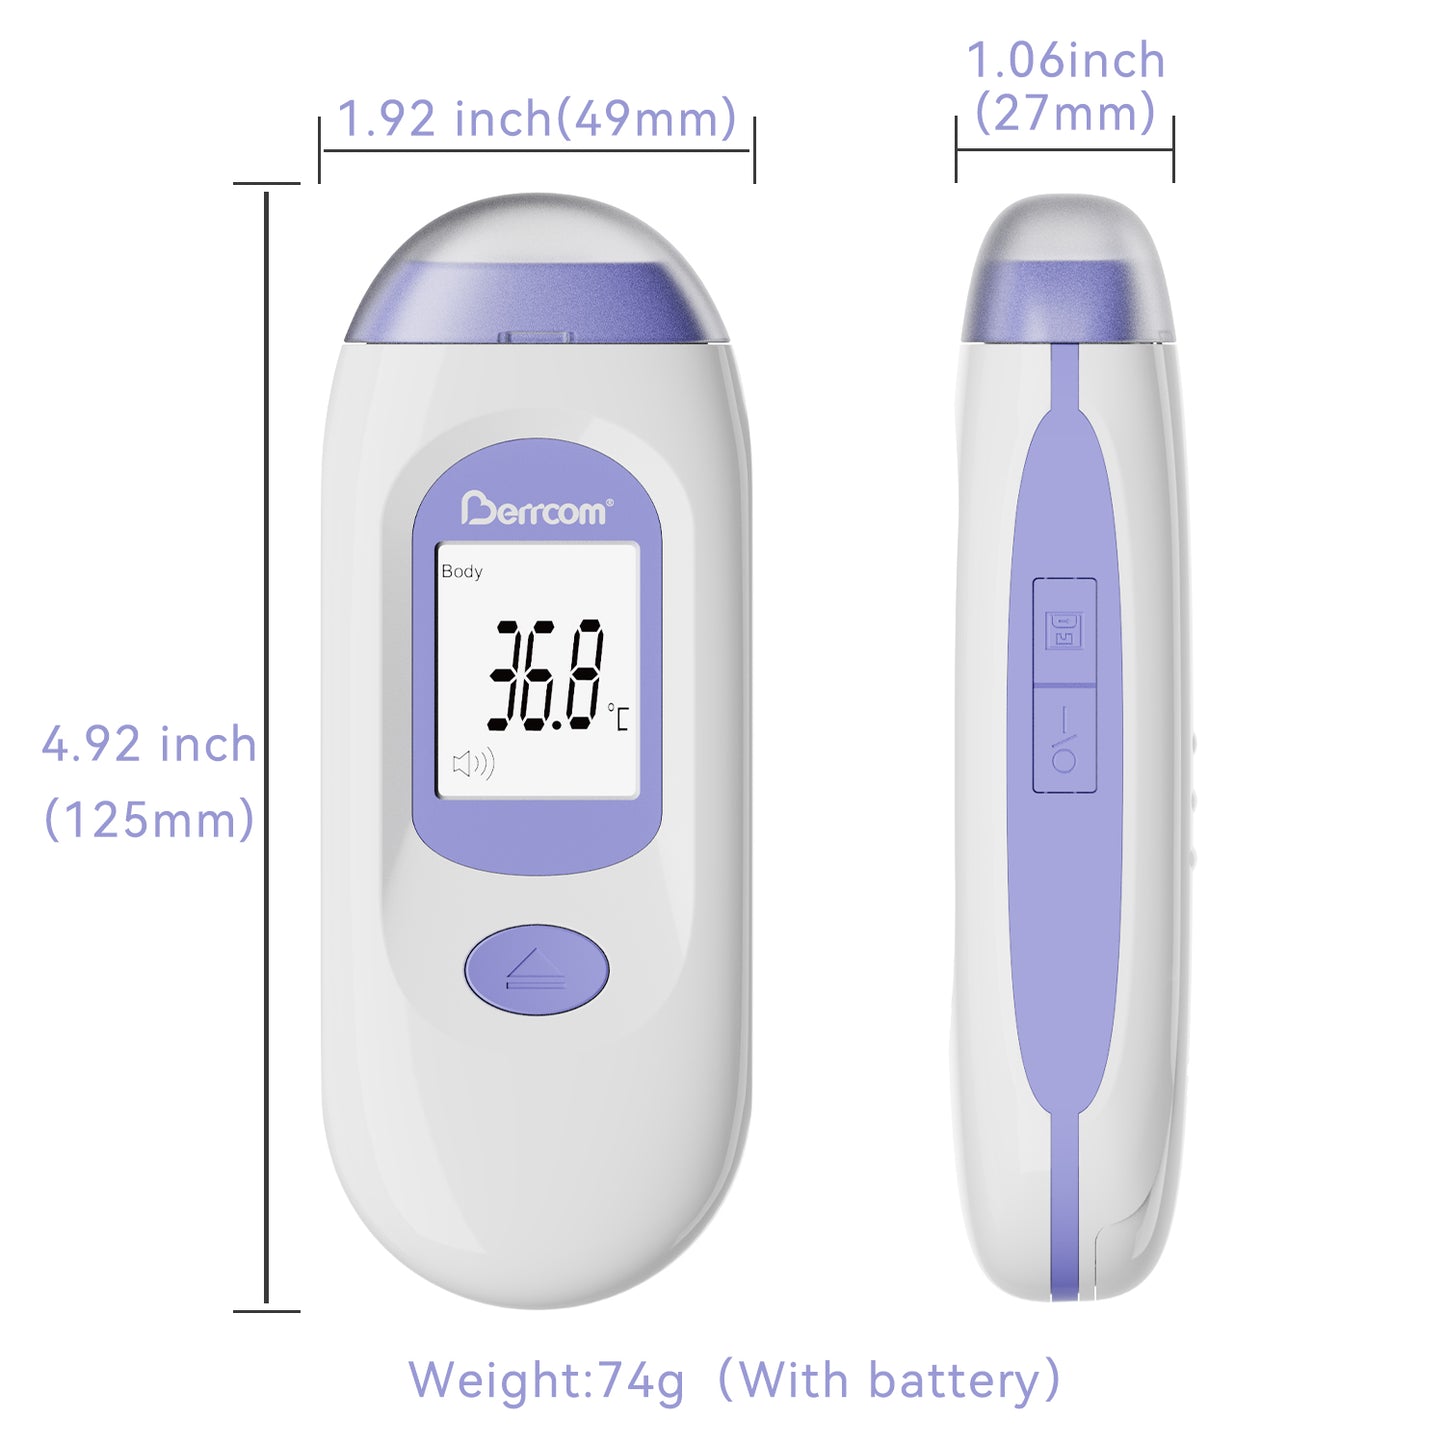 Berrcom Non Contact Infrared Forehead Thermometer for Adults and Babies JXB-192